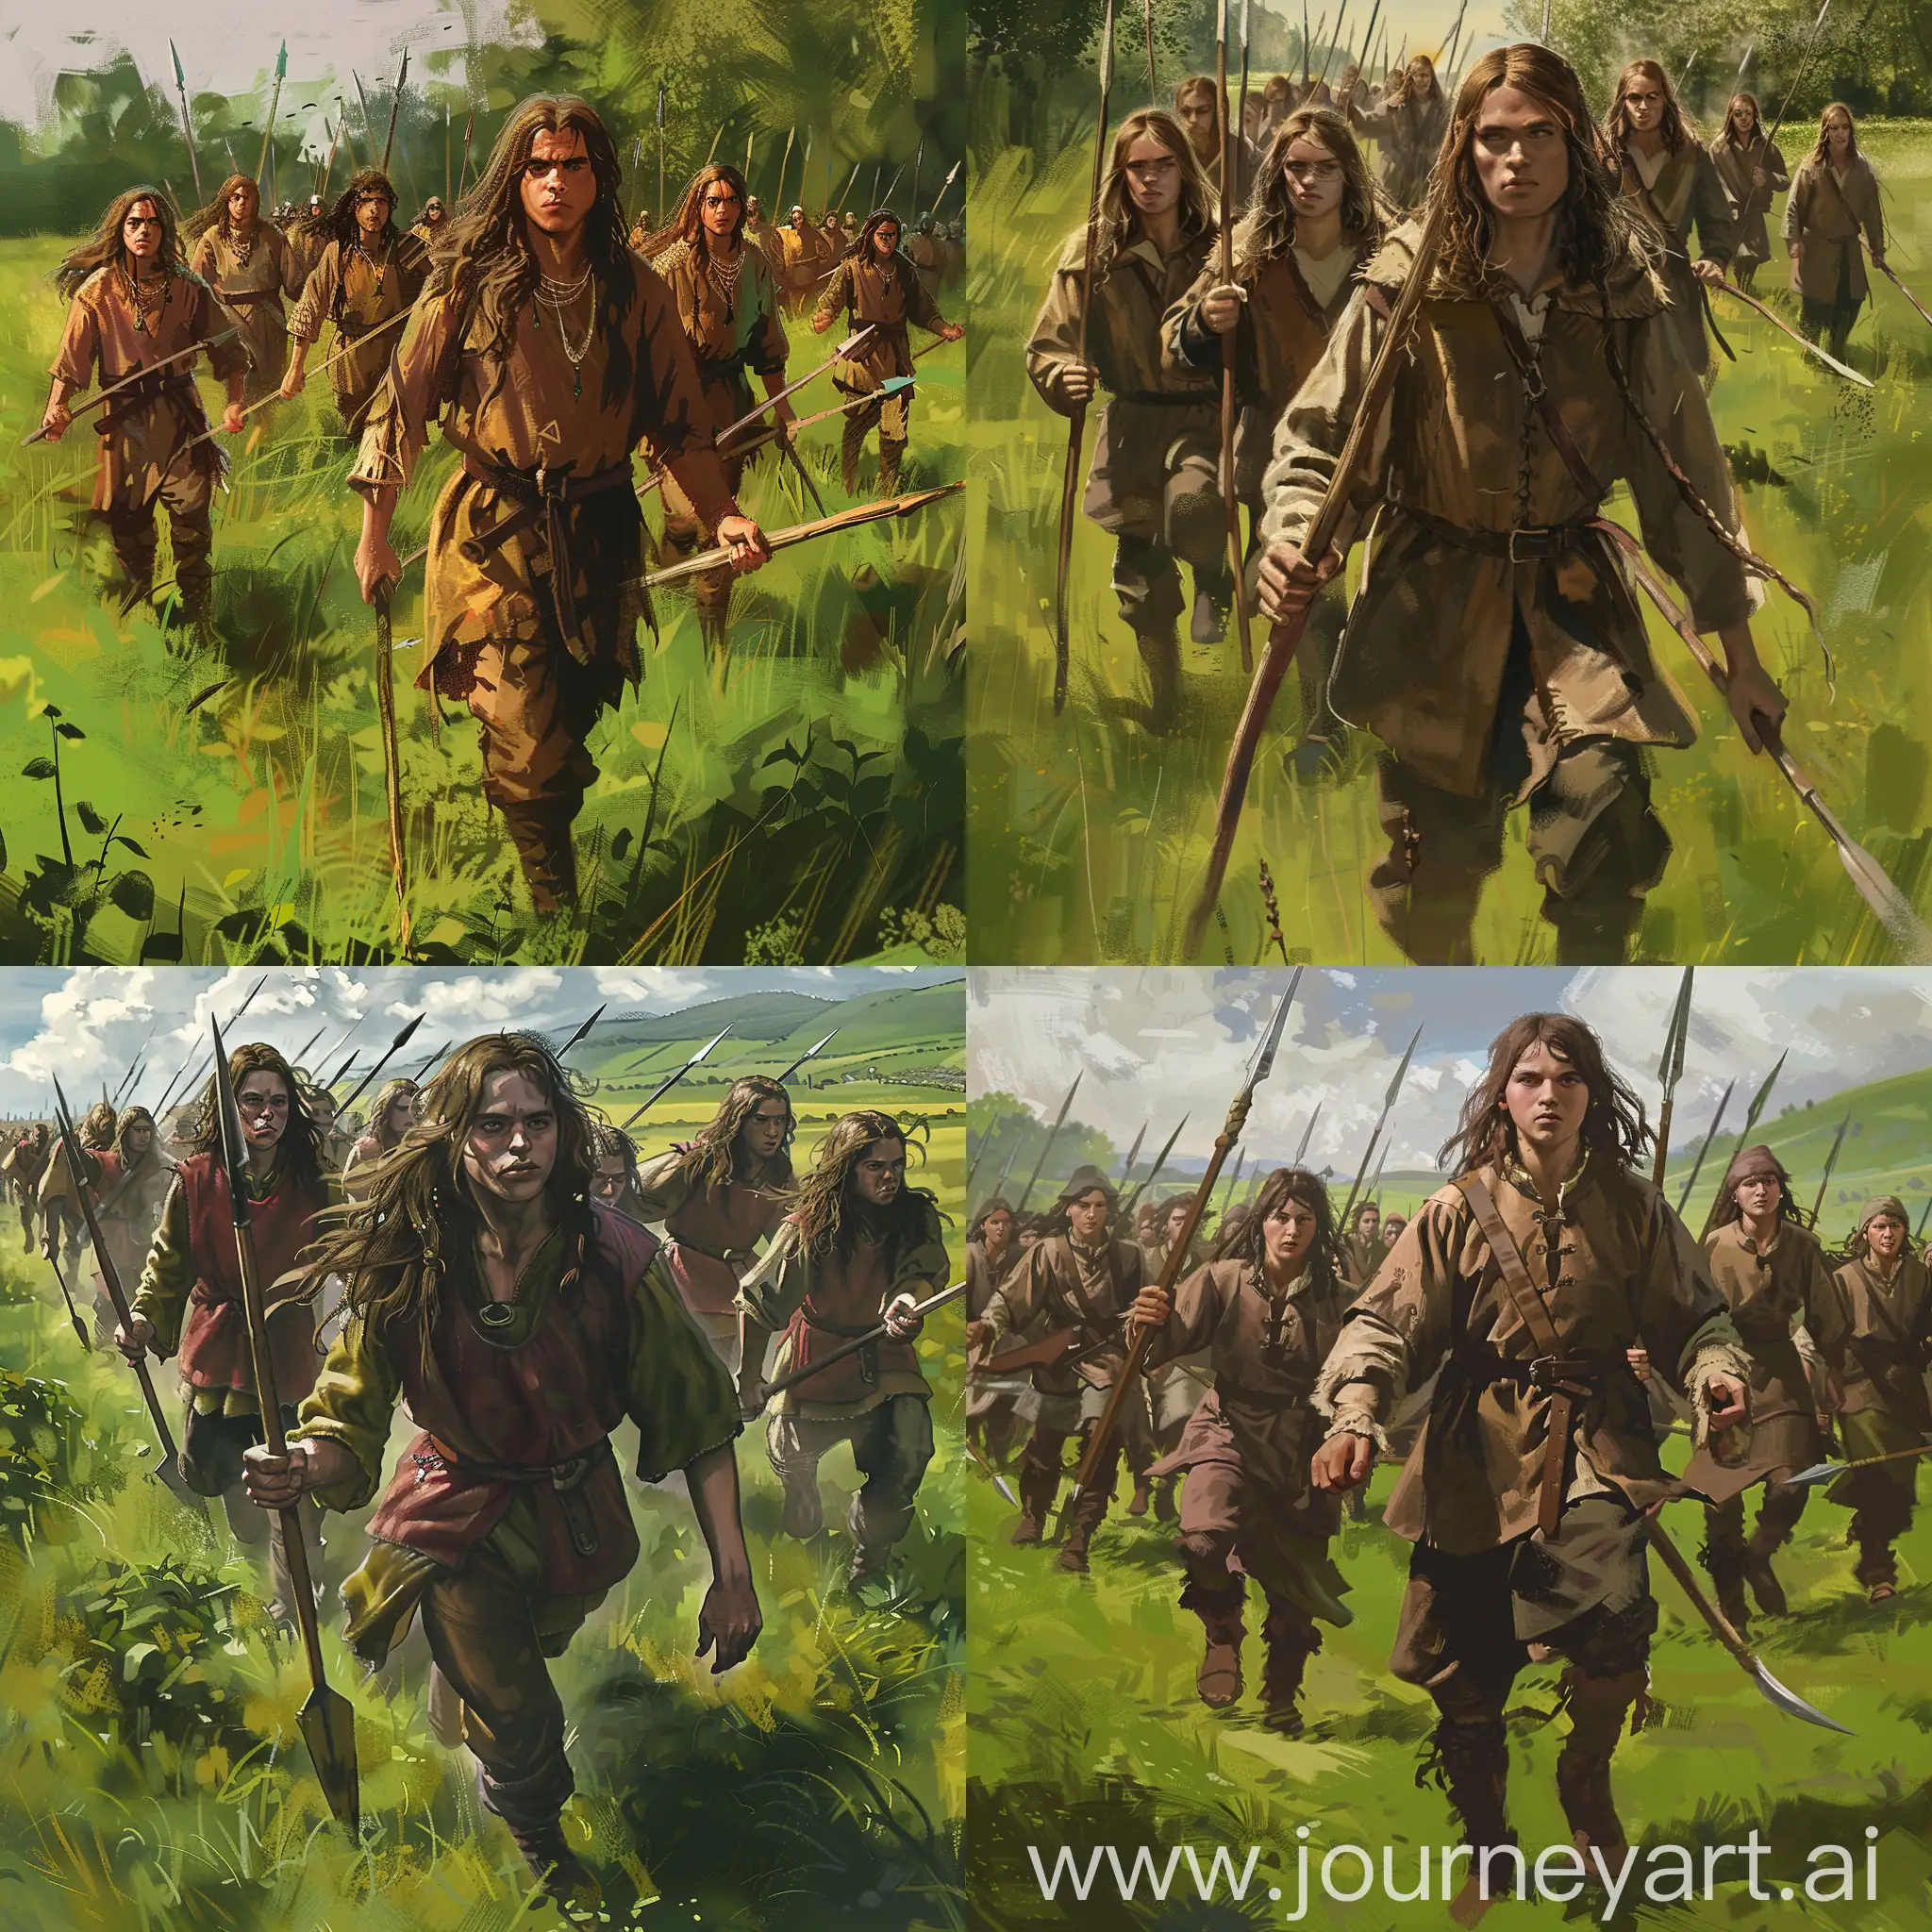 Medieval-Peasant-Army-Marching-Across-Verdant-Fields